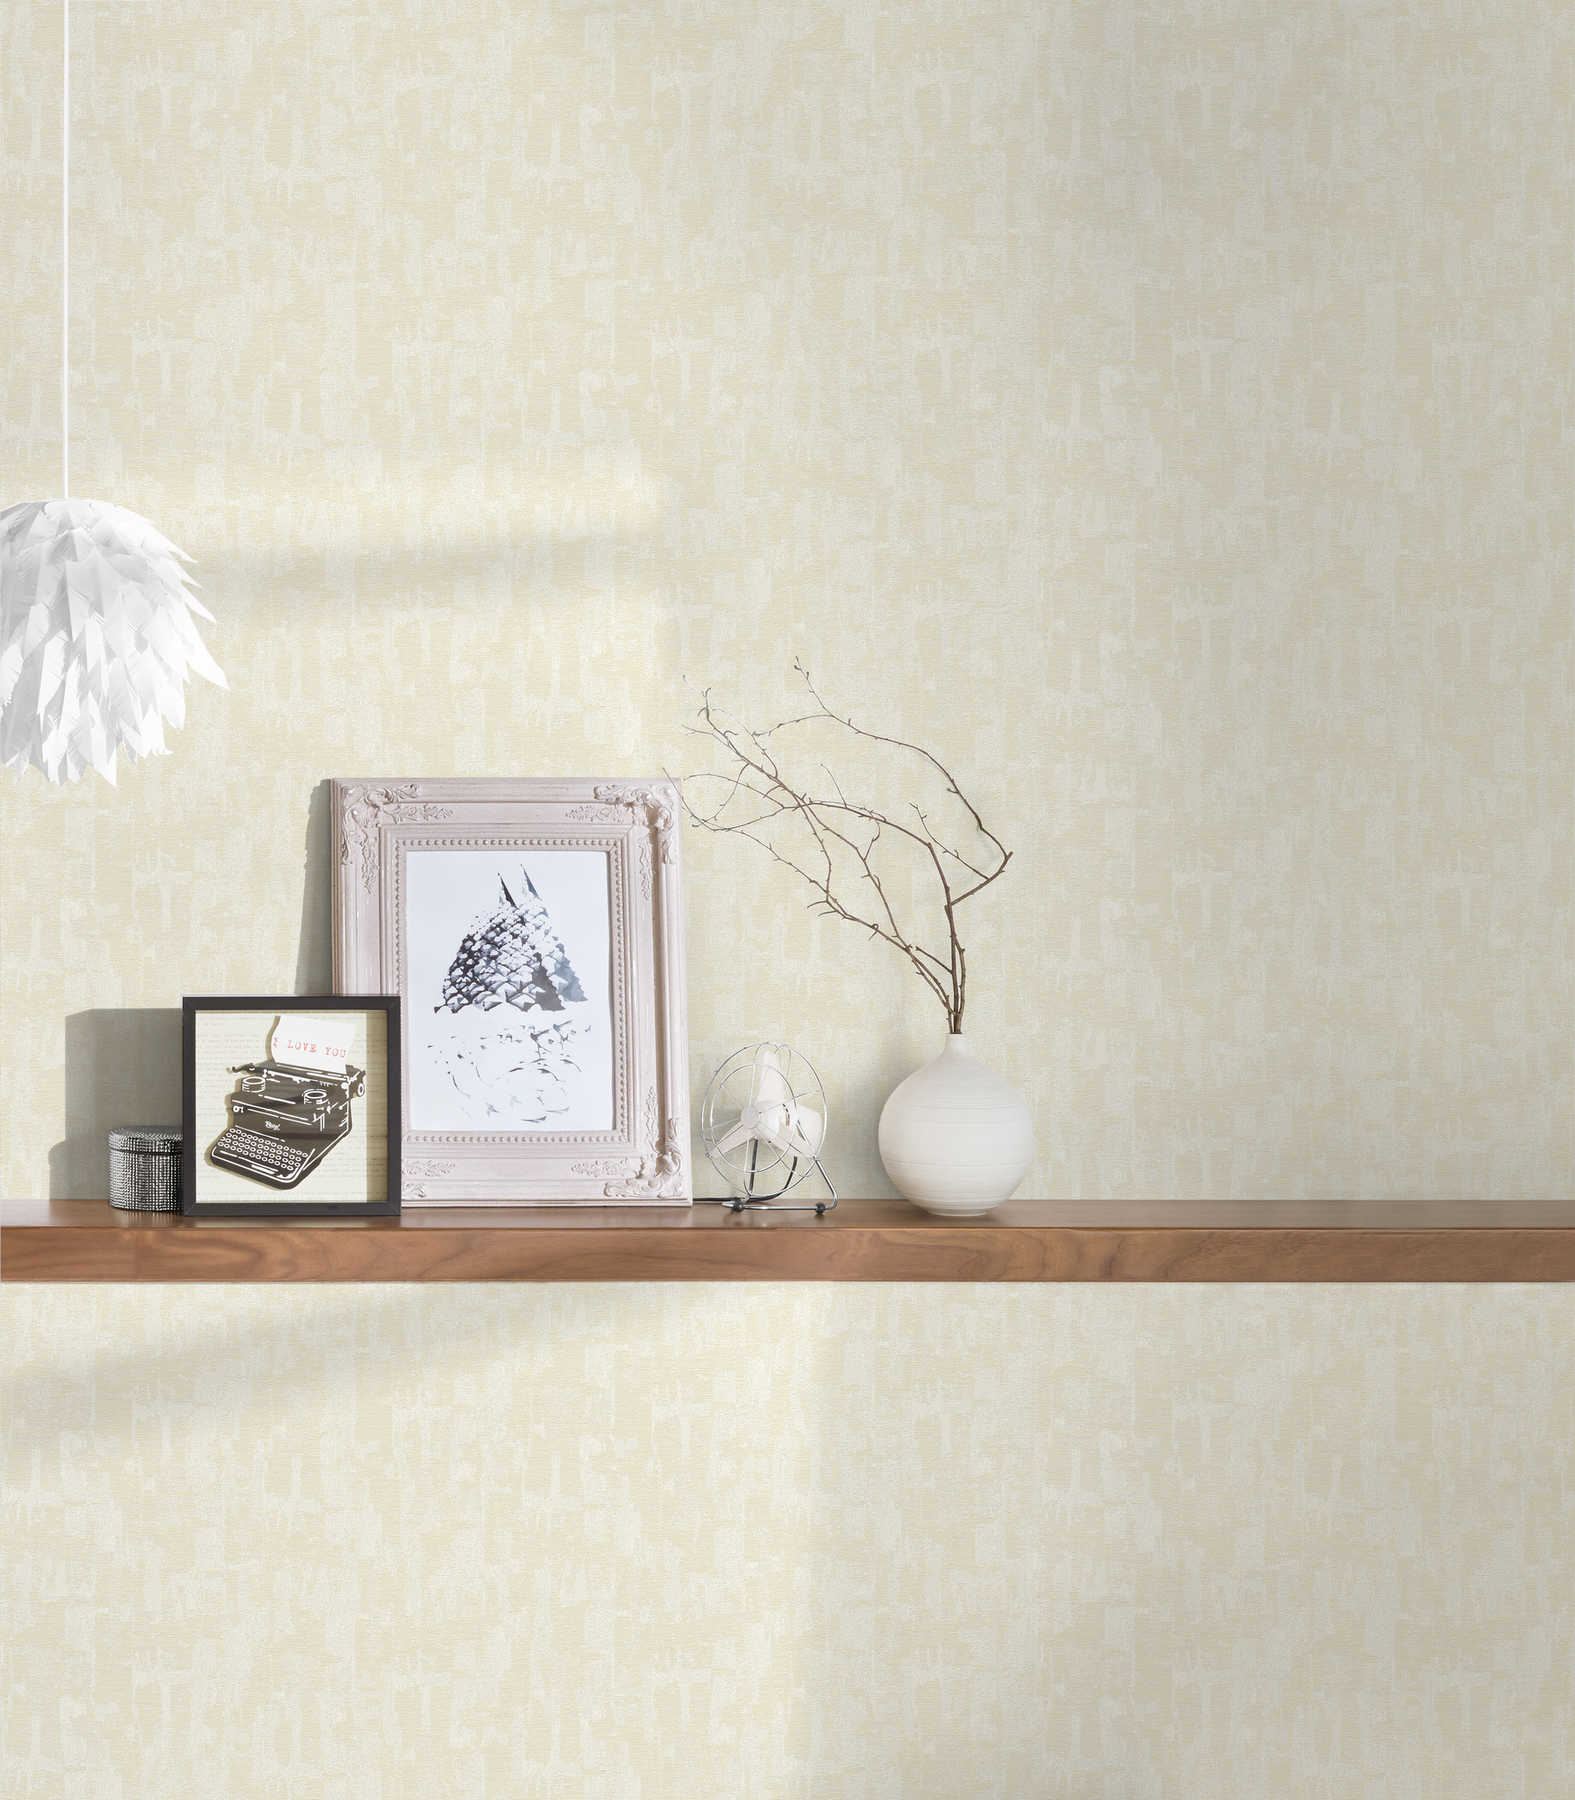             Pattern wallpaper cream and white mottled in natural retro look
        